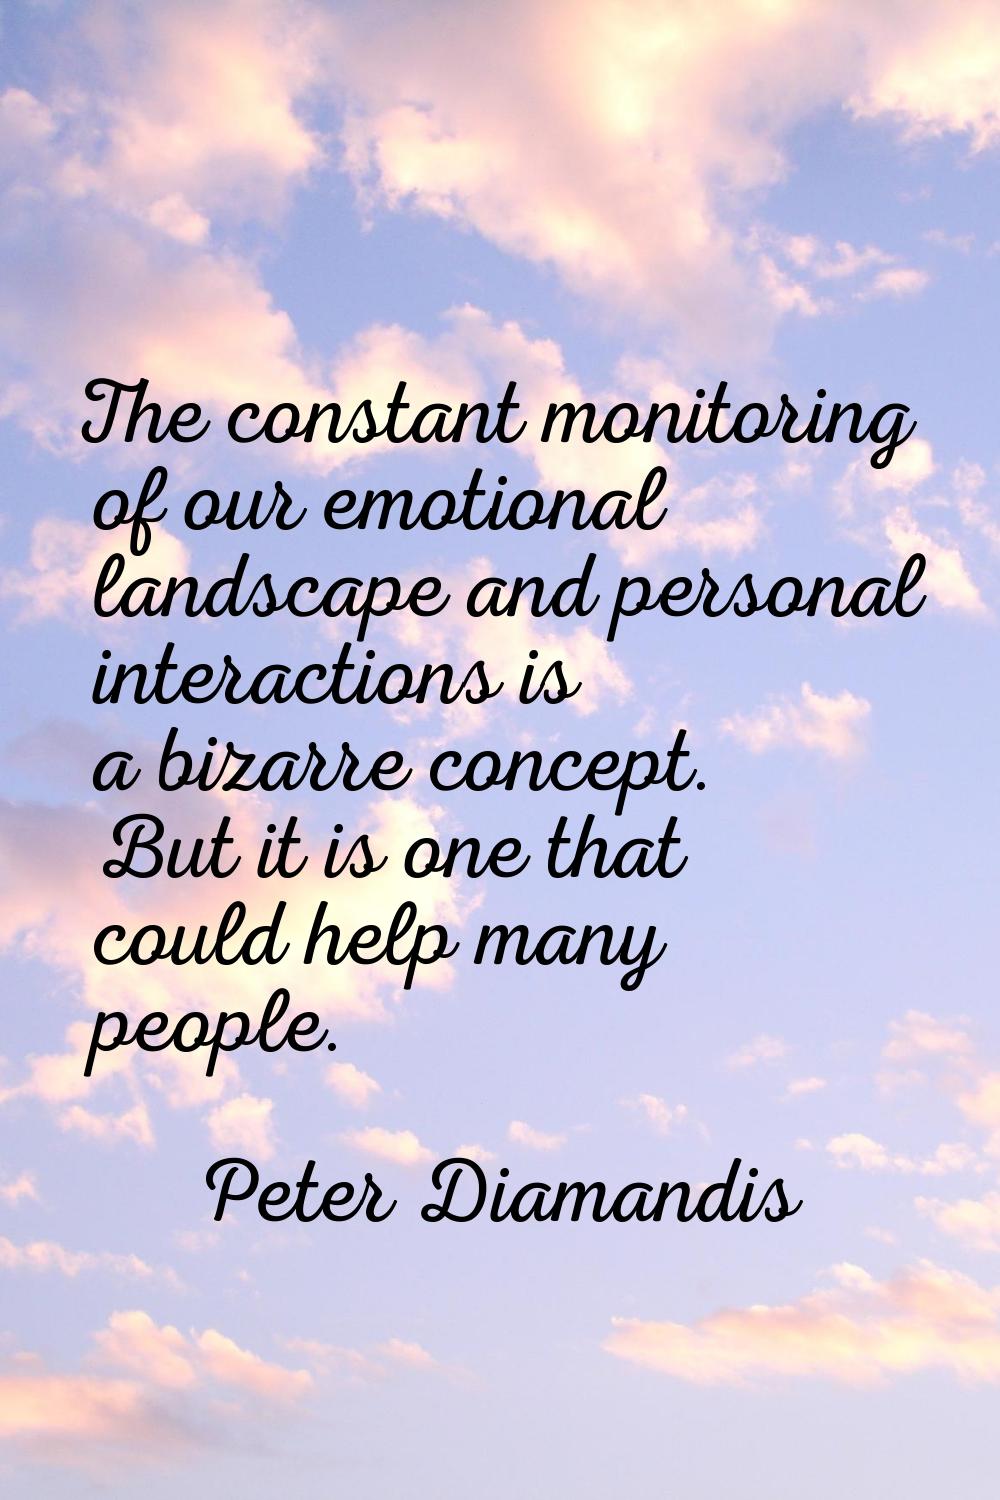 The constant monitoring of our emotional landscape and personal interactions is a bizarre concept. 